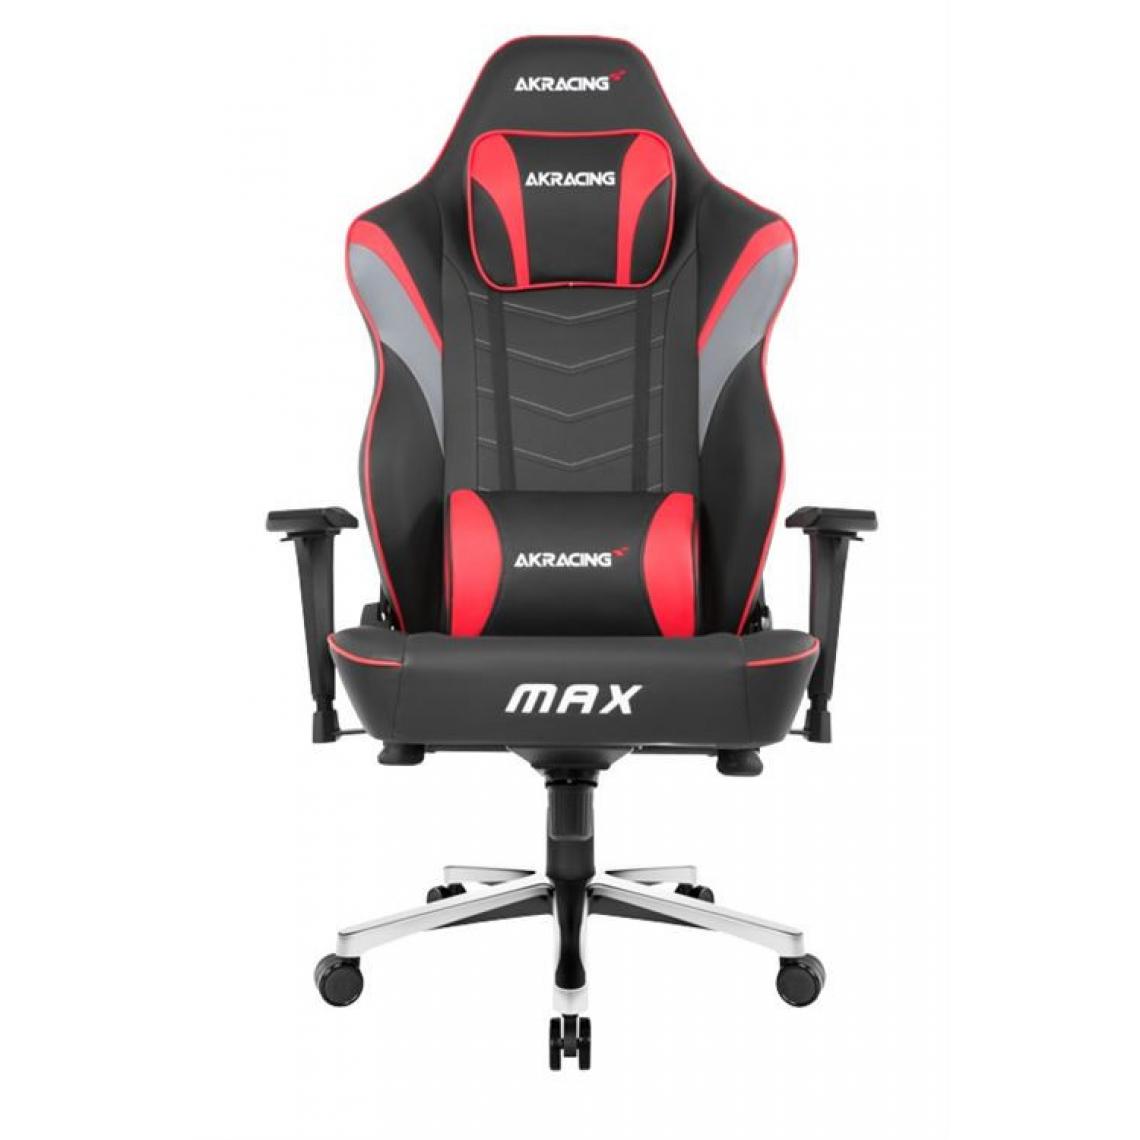 Akracing - Chaise Gaming AkRacing Série Masters Max Noir et rouge - Chaise gamer